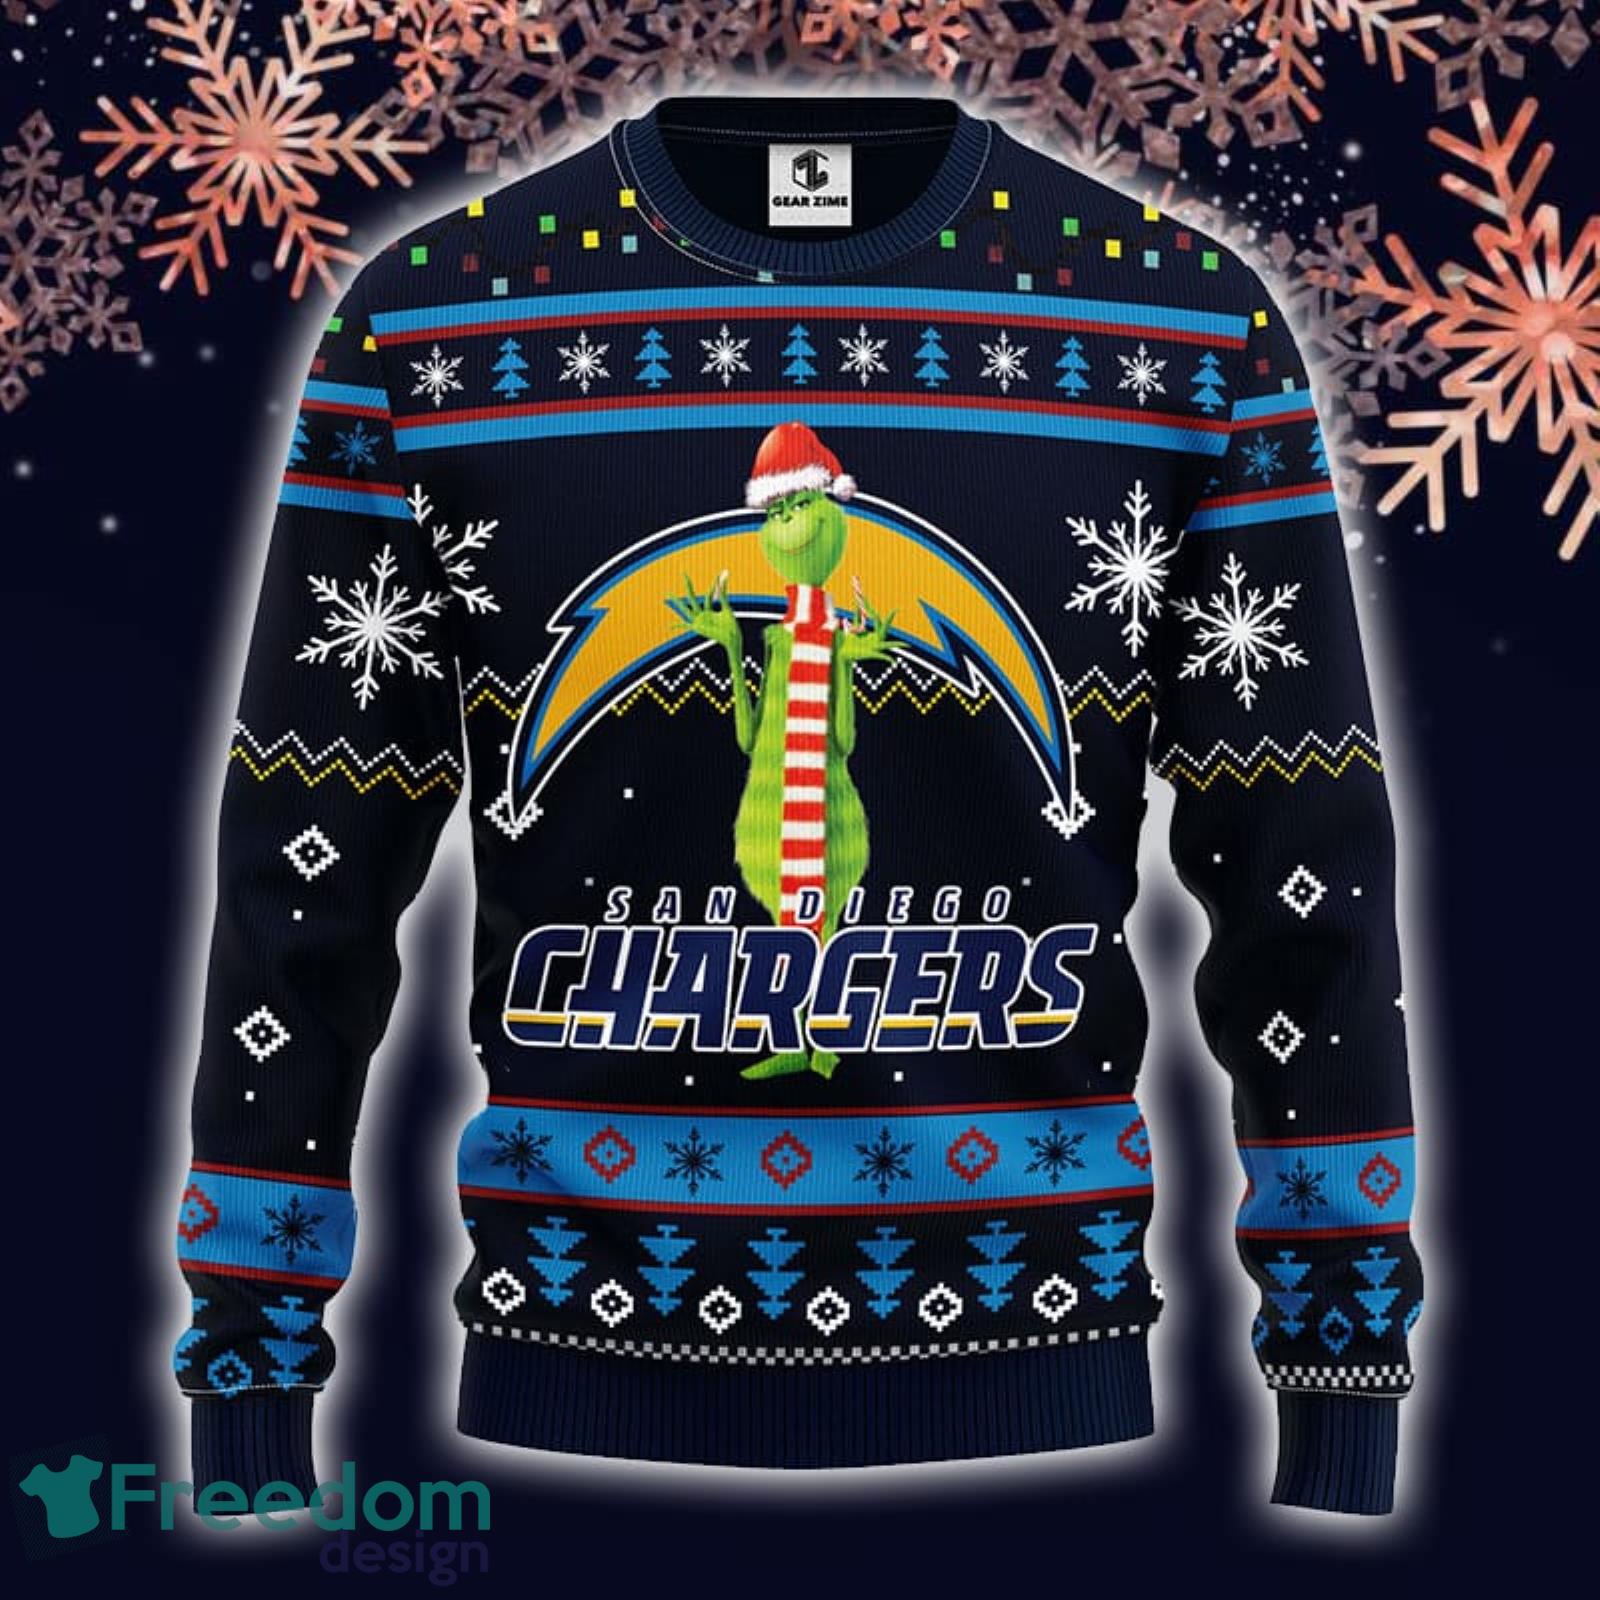 san diego chargers sweater